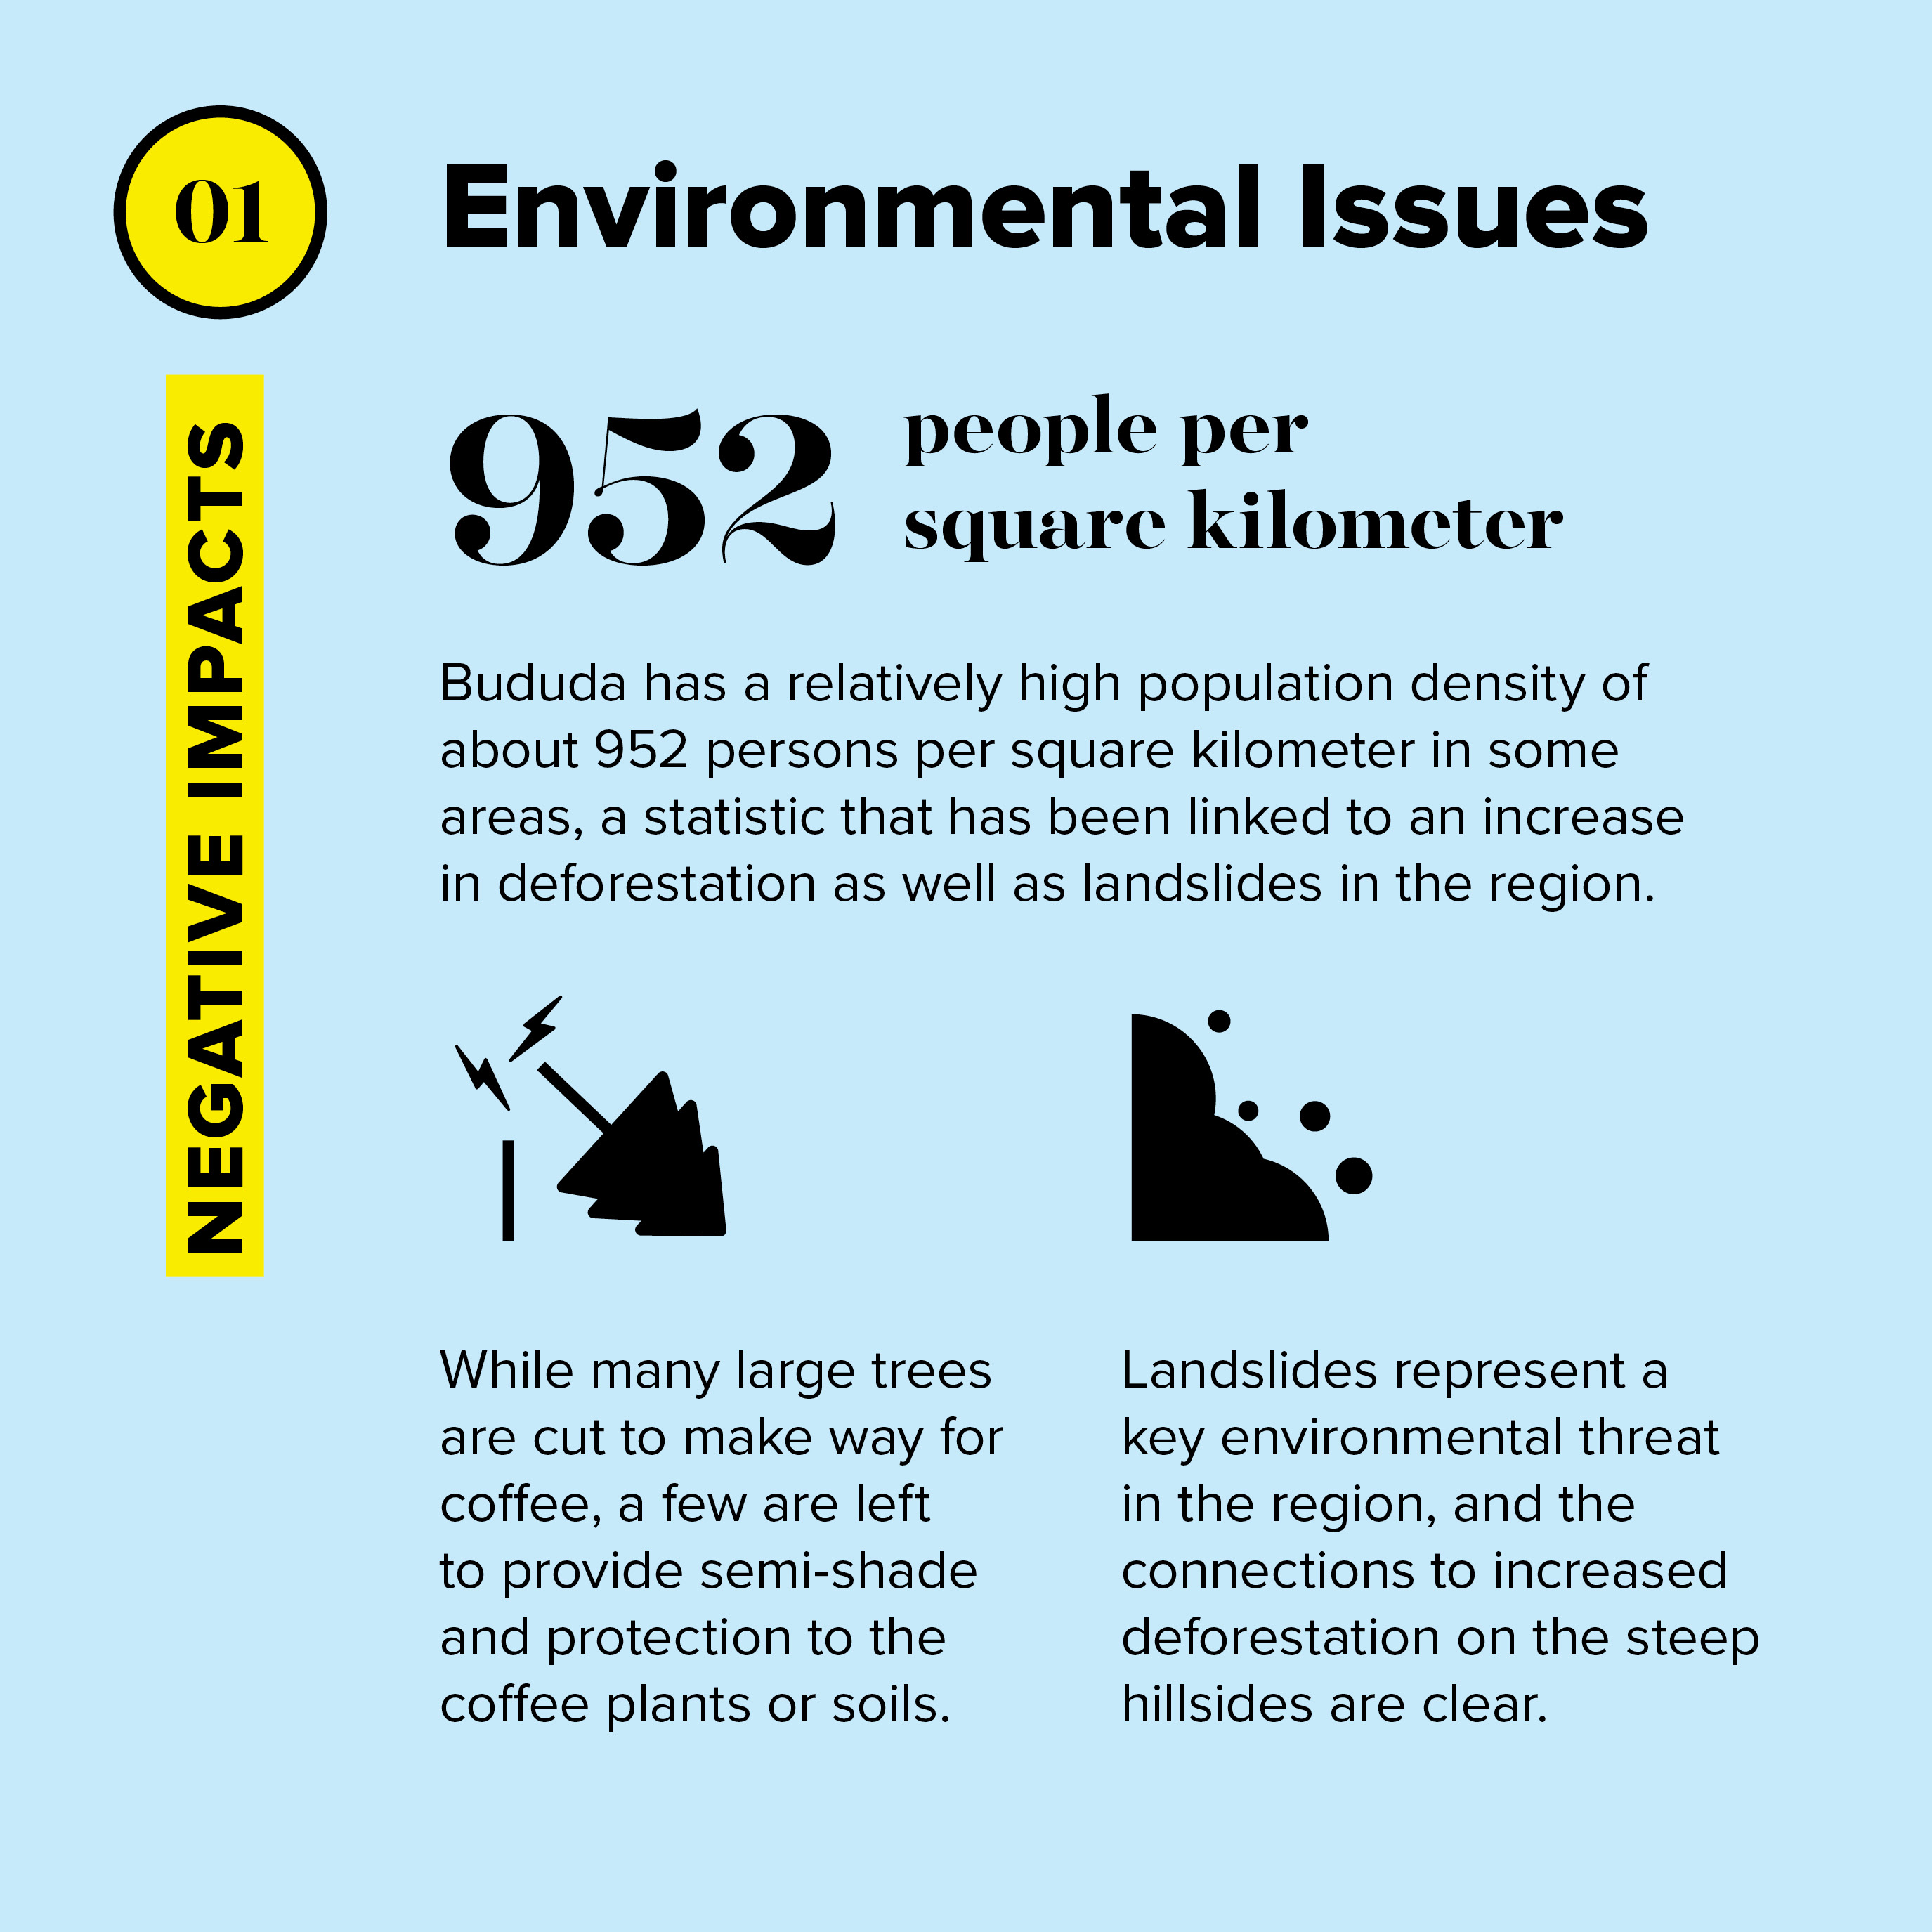 Bududa has a relatively high population density of about 952 persons per square kilometer in some areas, a statistic that has been linked to an increase in deforestation as well as landslides in the region.